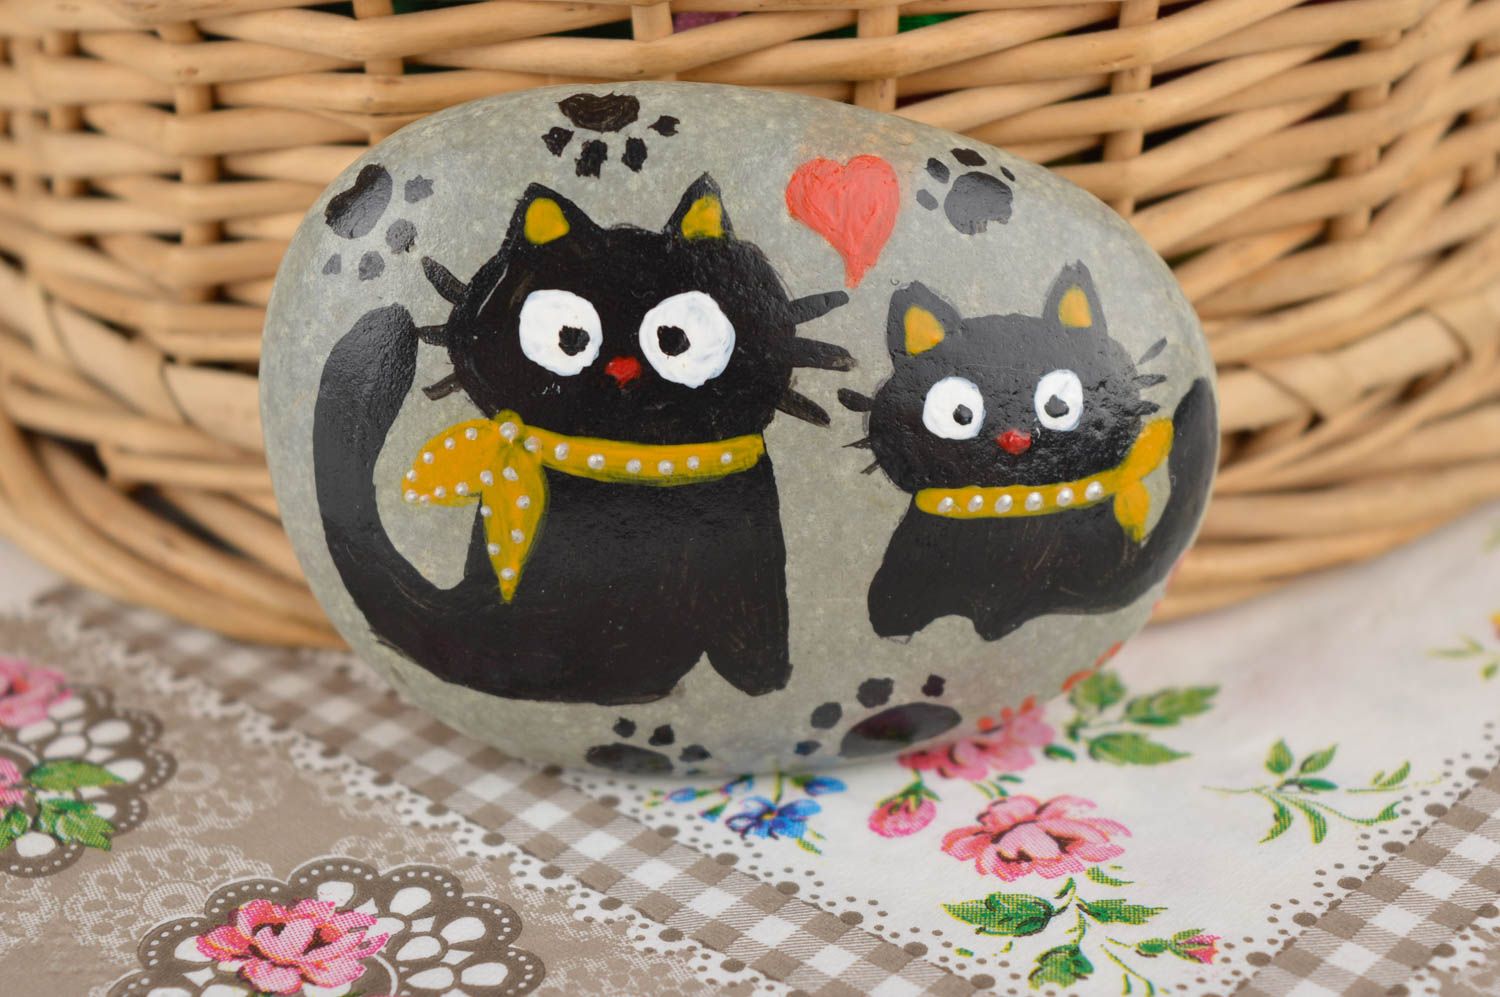 Pebble painting home decor designer present decorative use only cats on pebbles photo 1